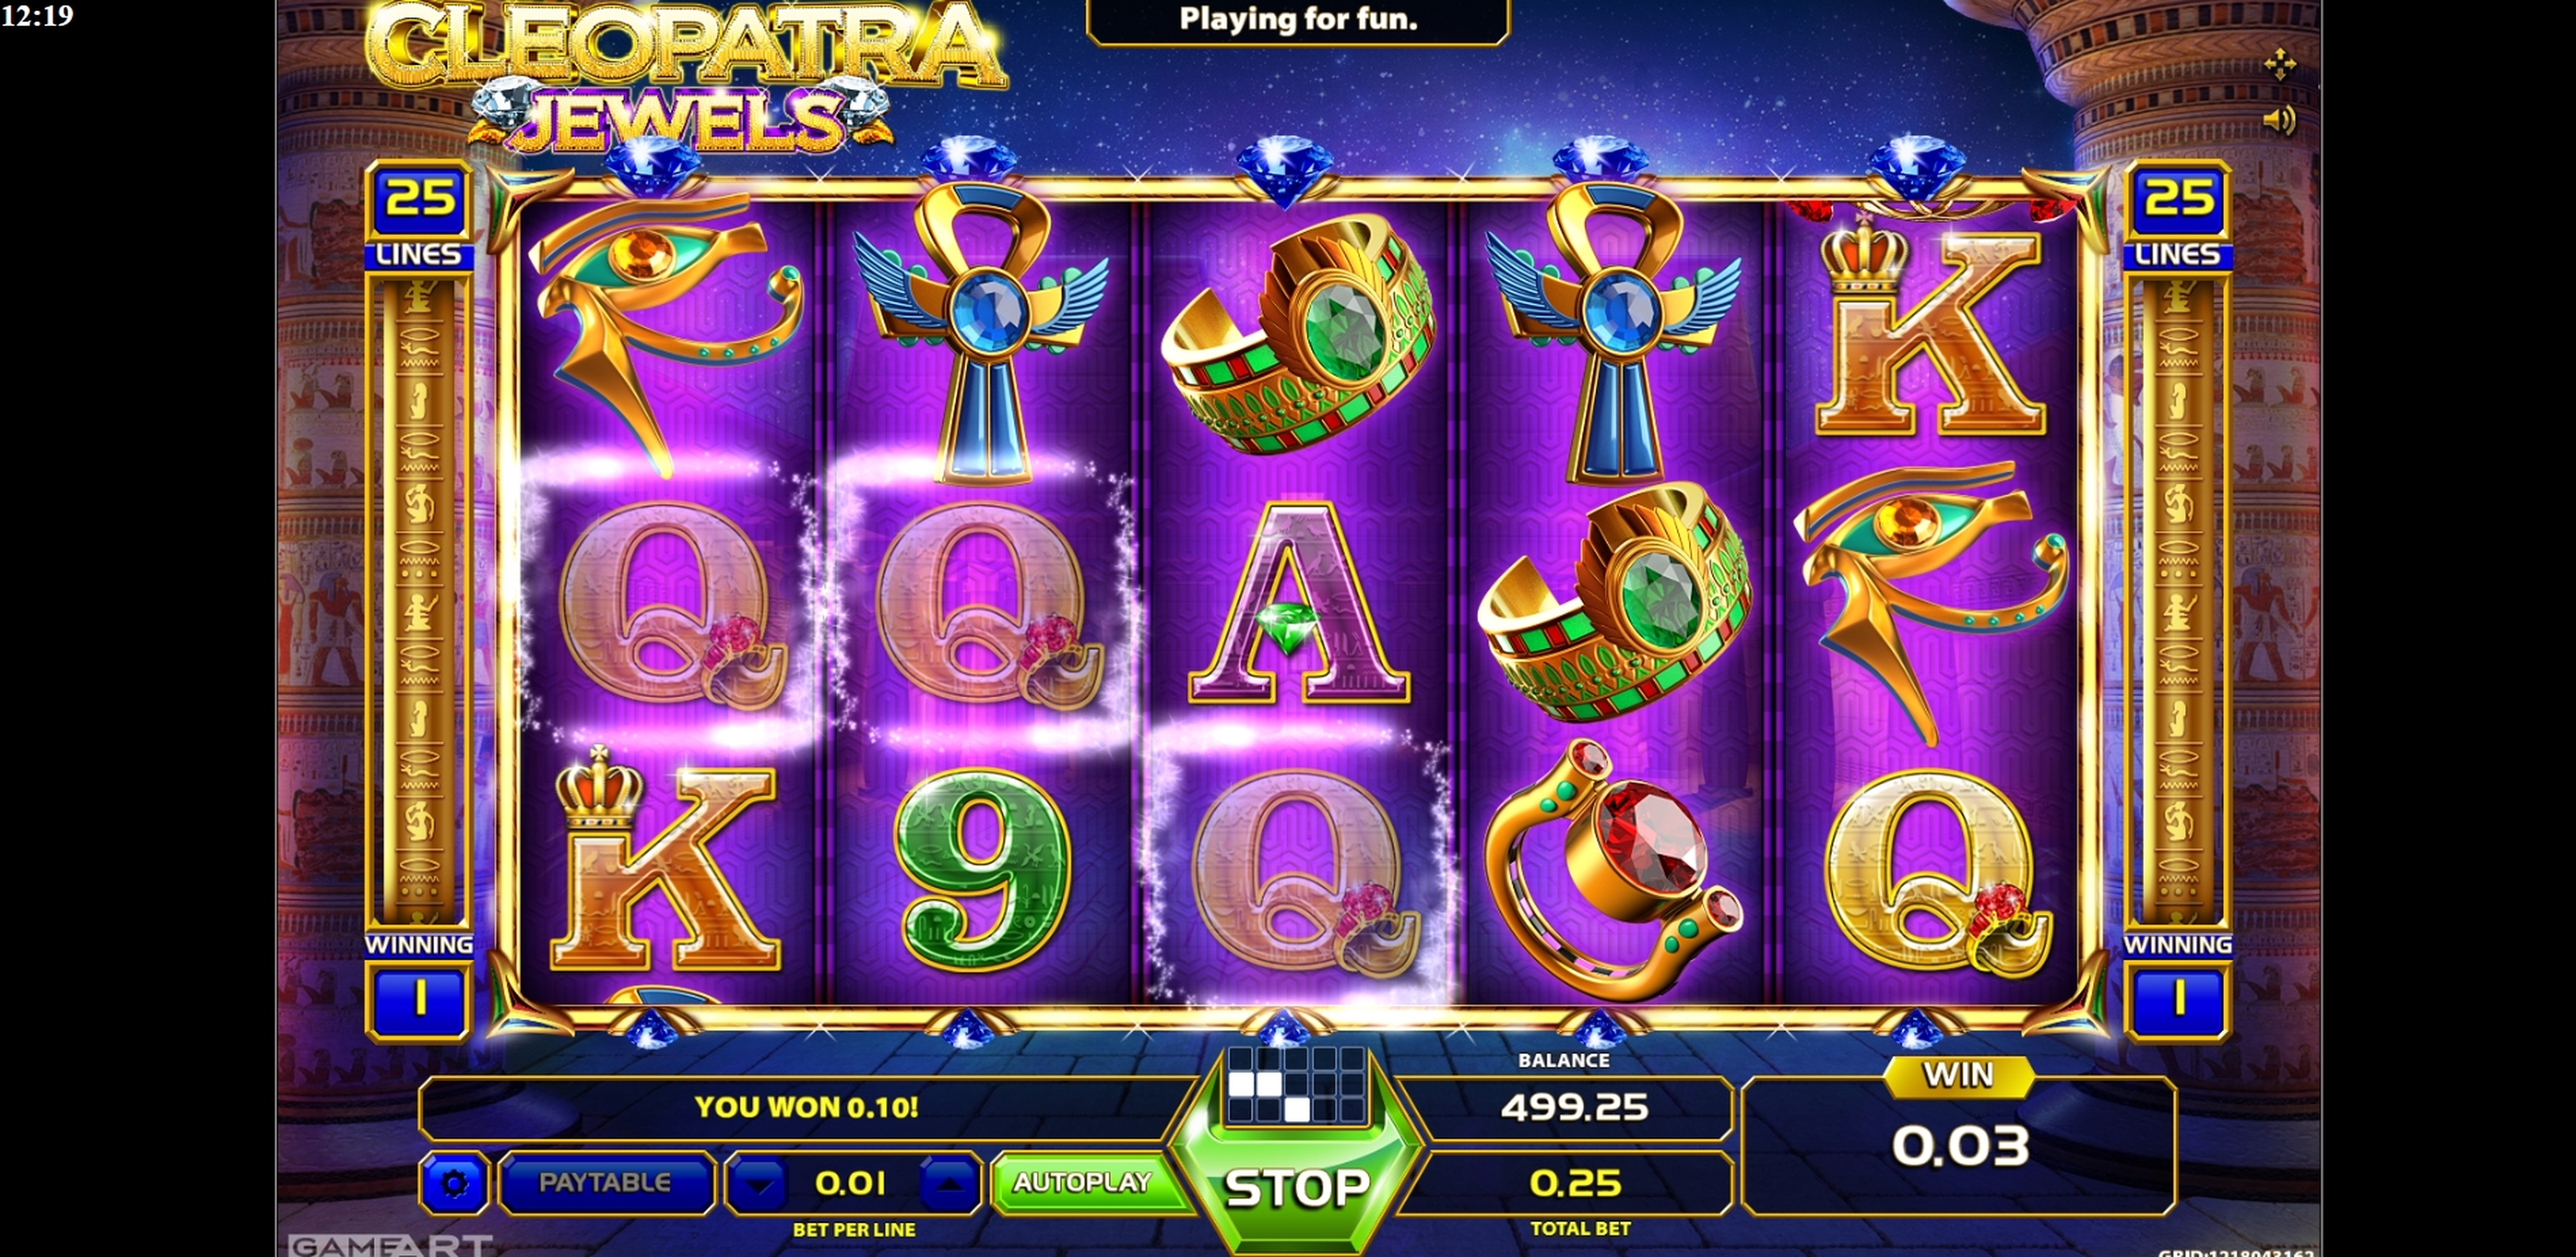 Win Money in Cleopatra Jewels Free Slot Game by GameArt